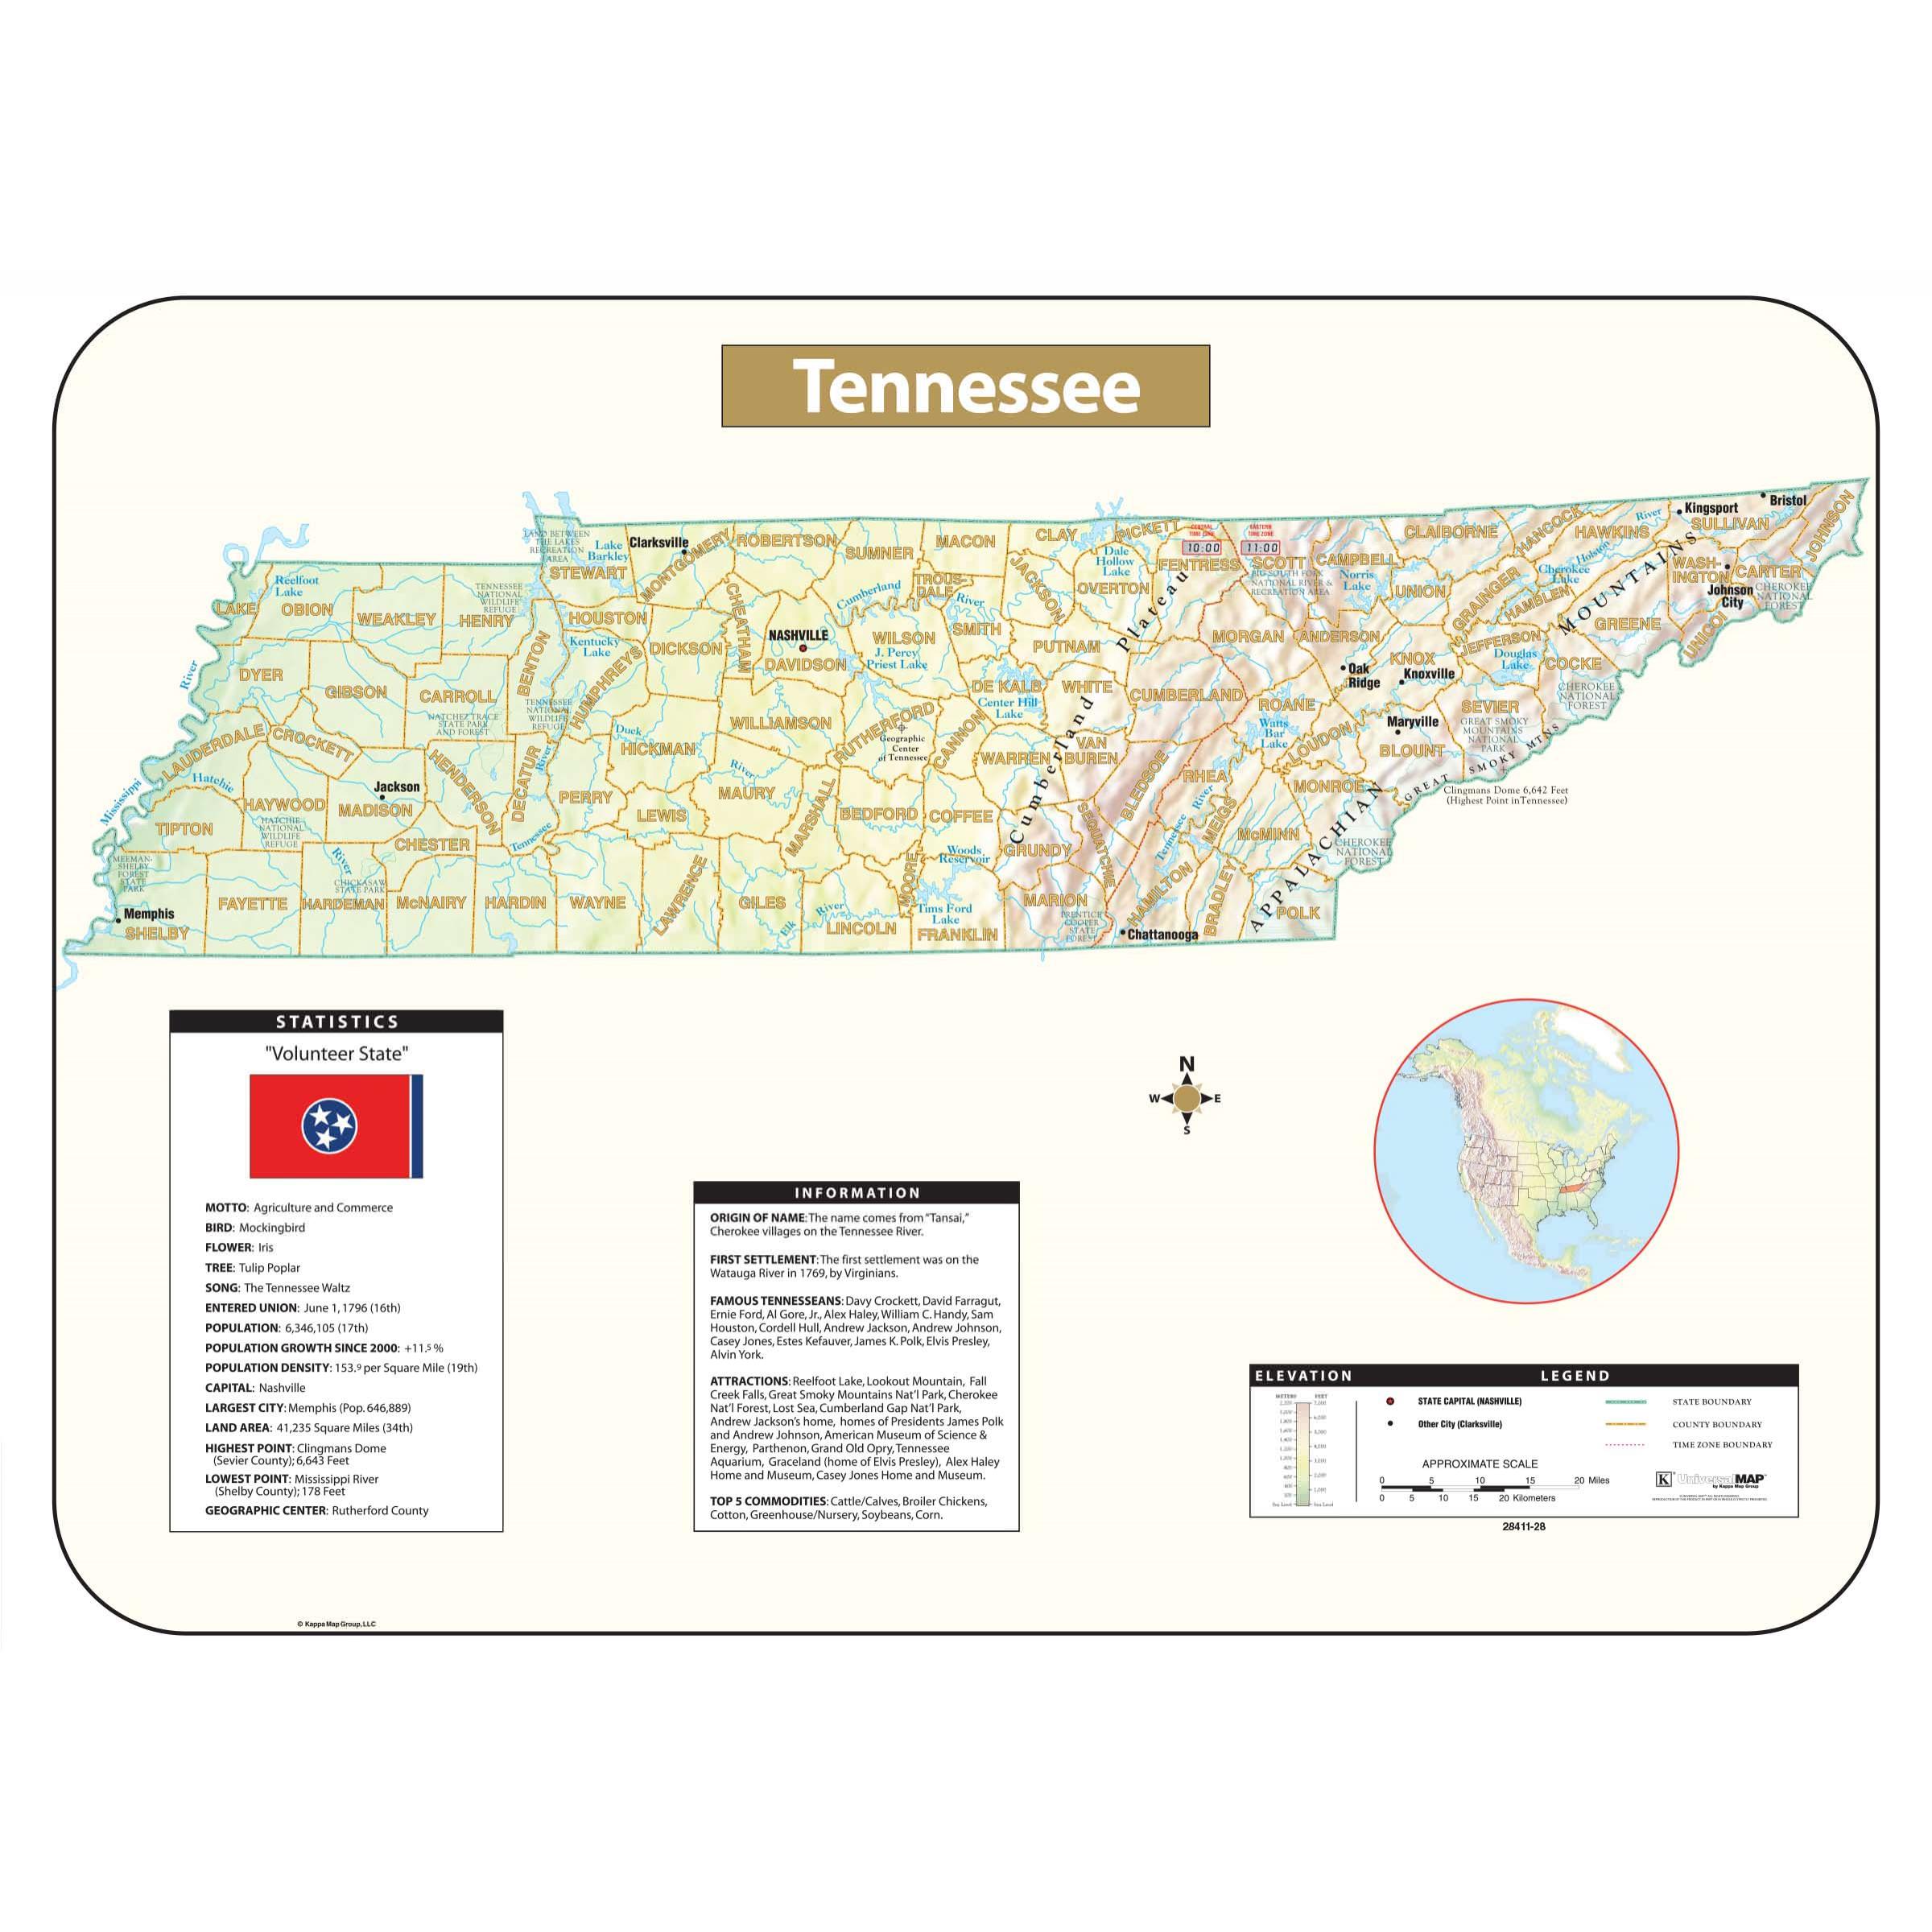 map of attractions in tennessee